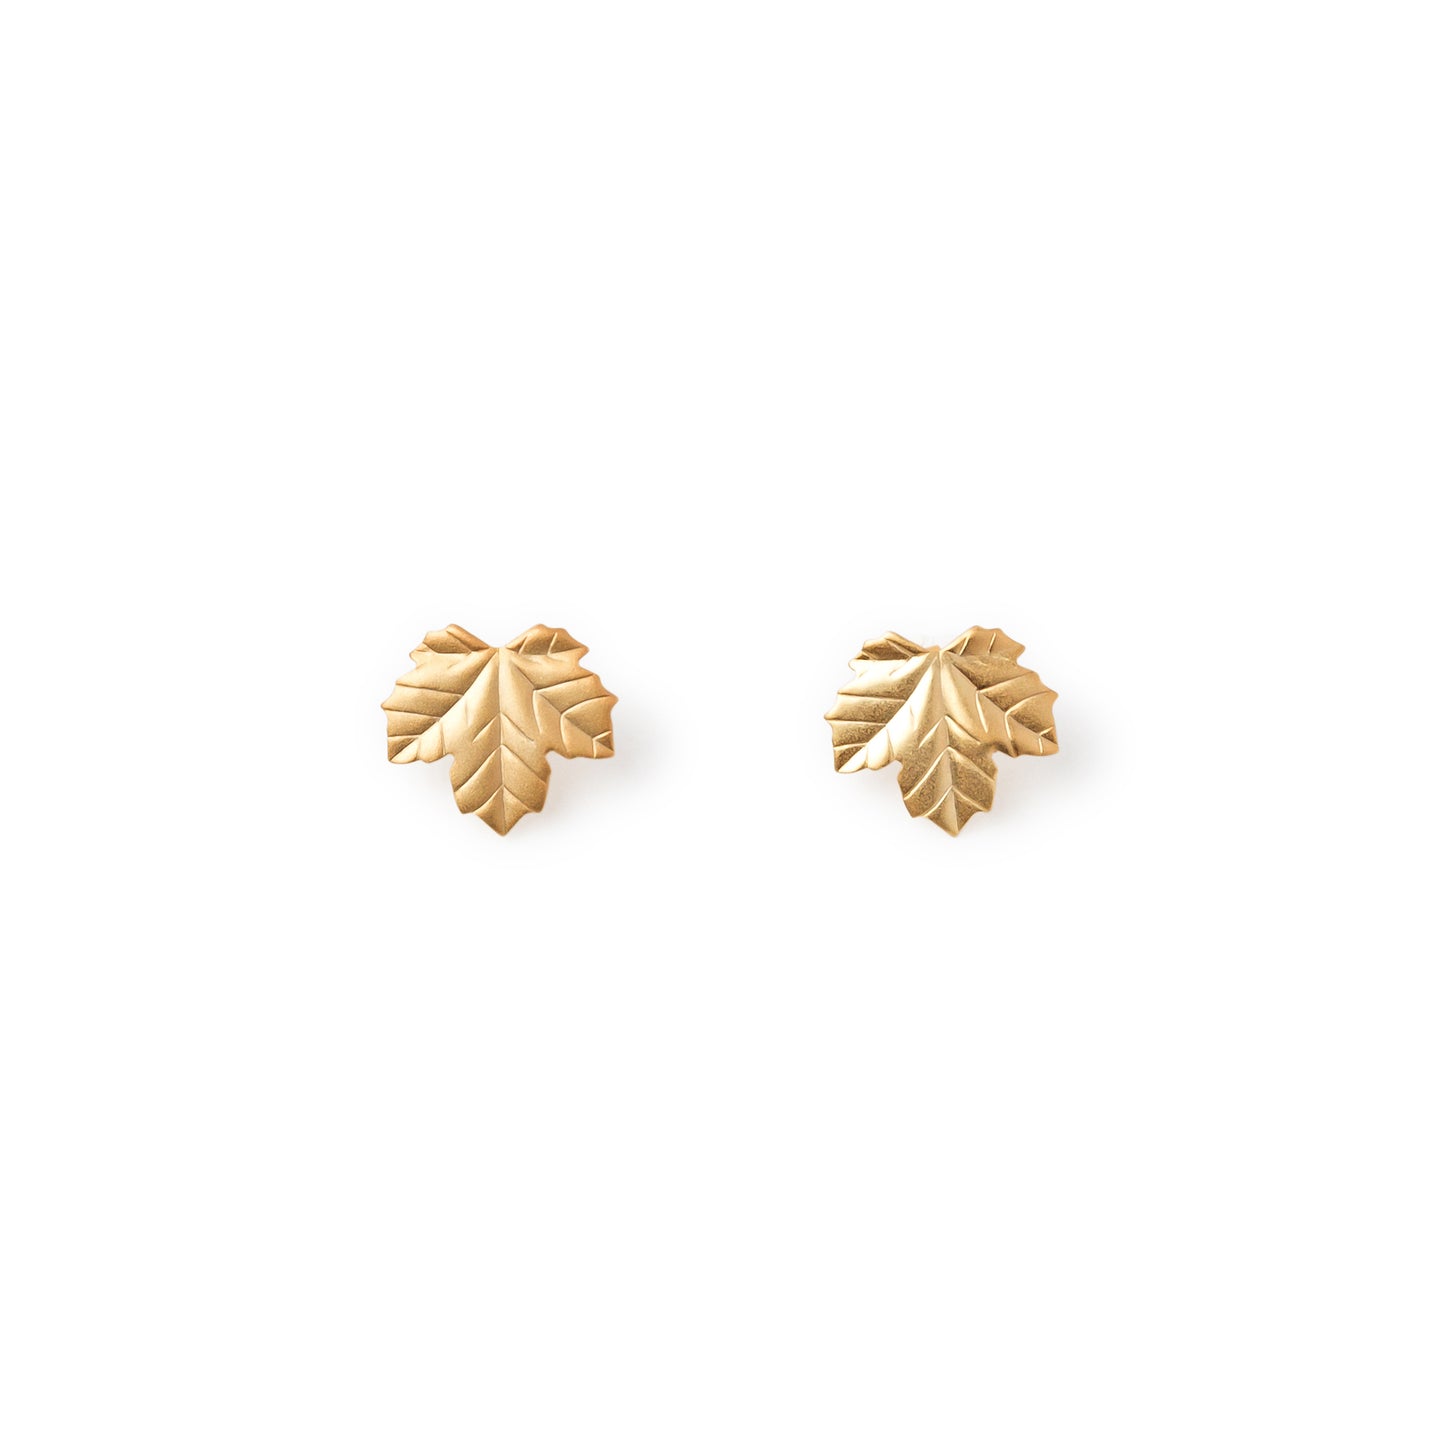 Small Ivy earrings 24ct gold plated